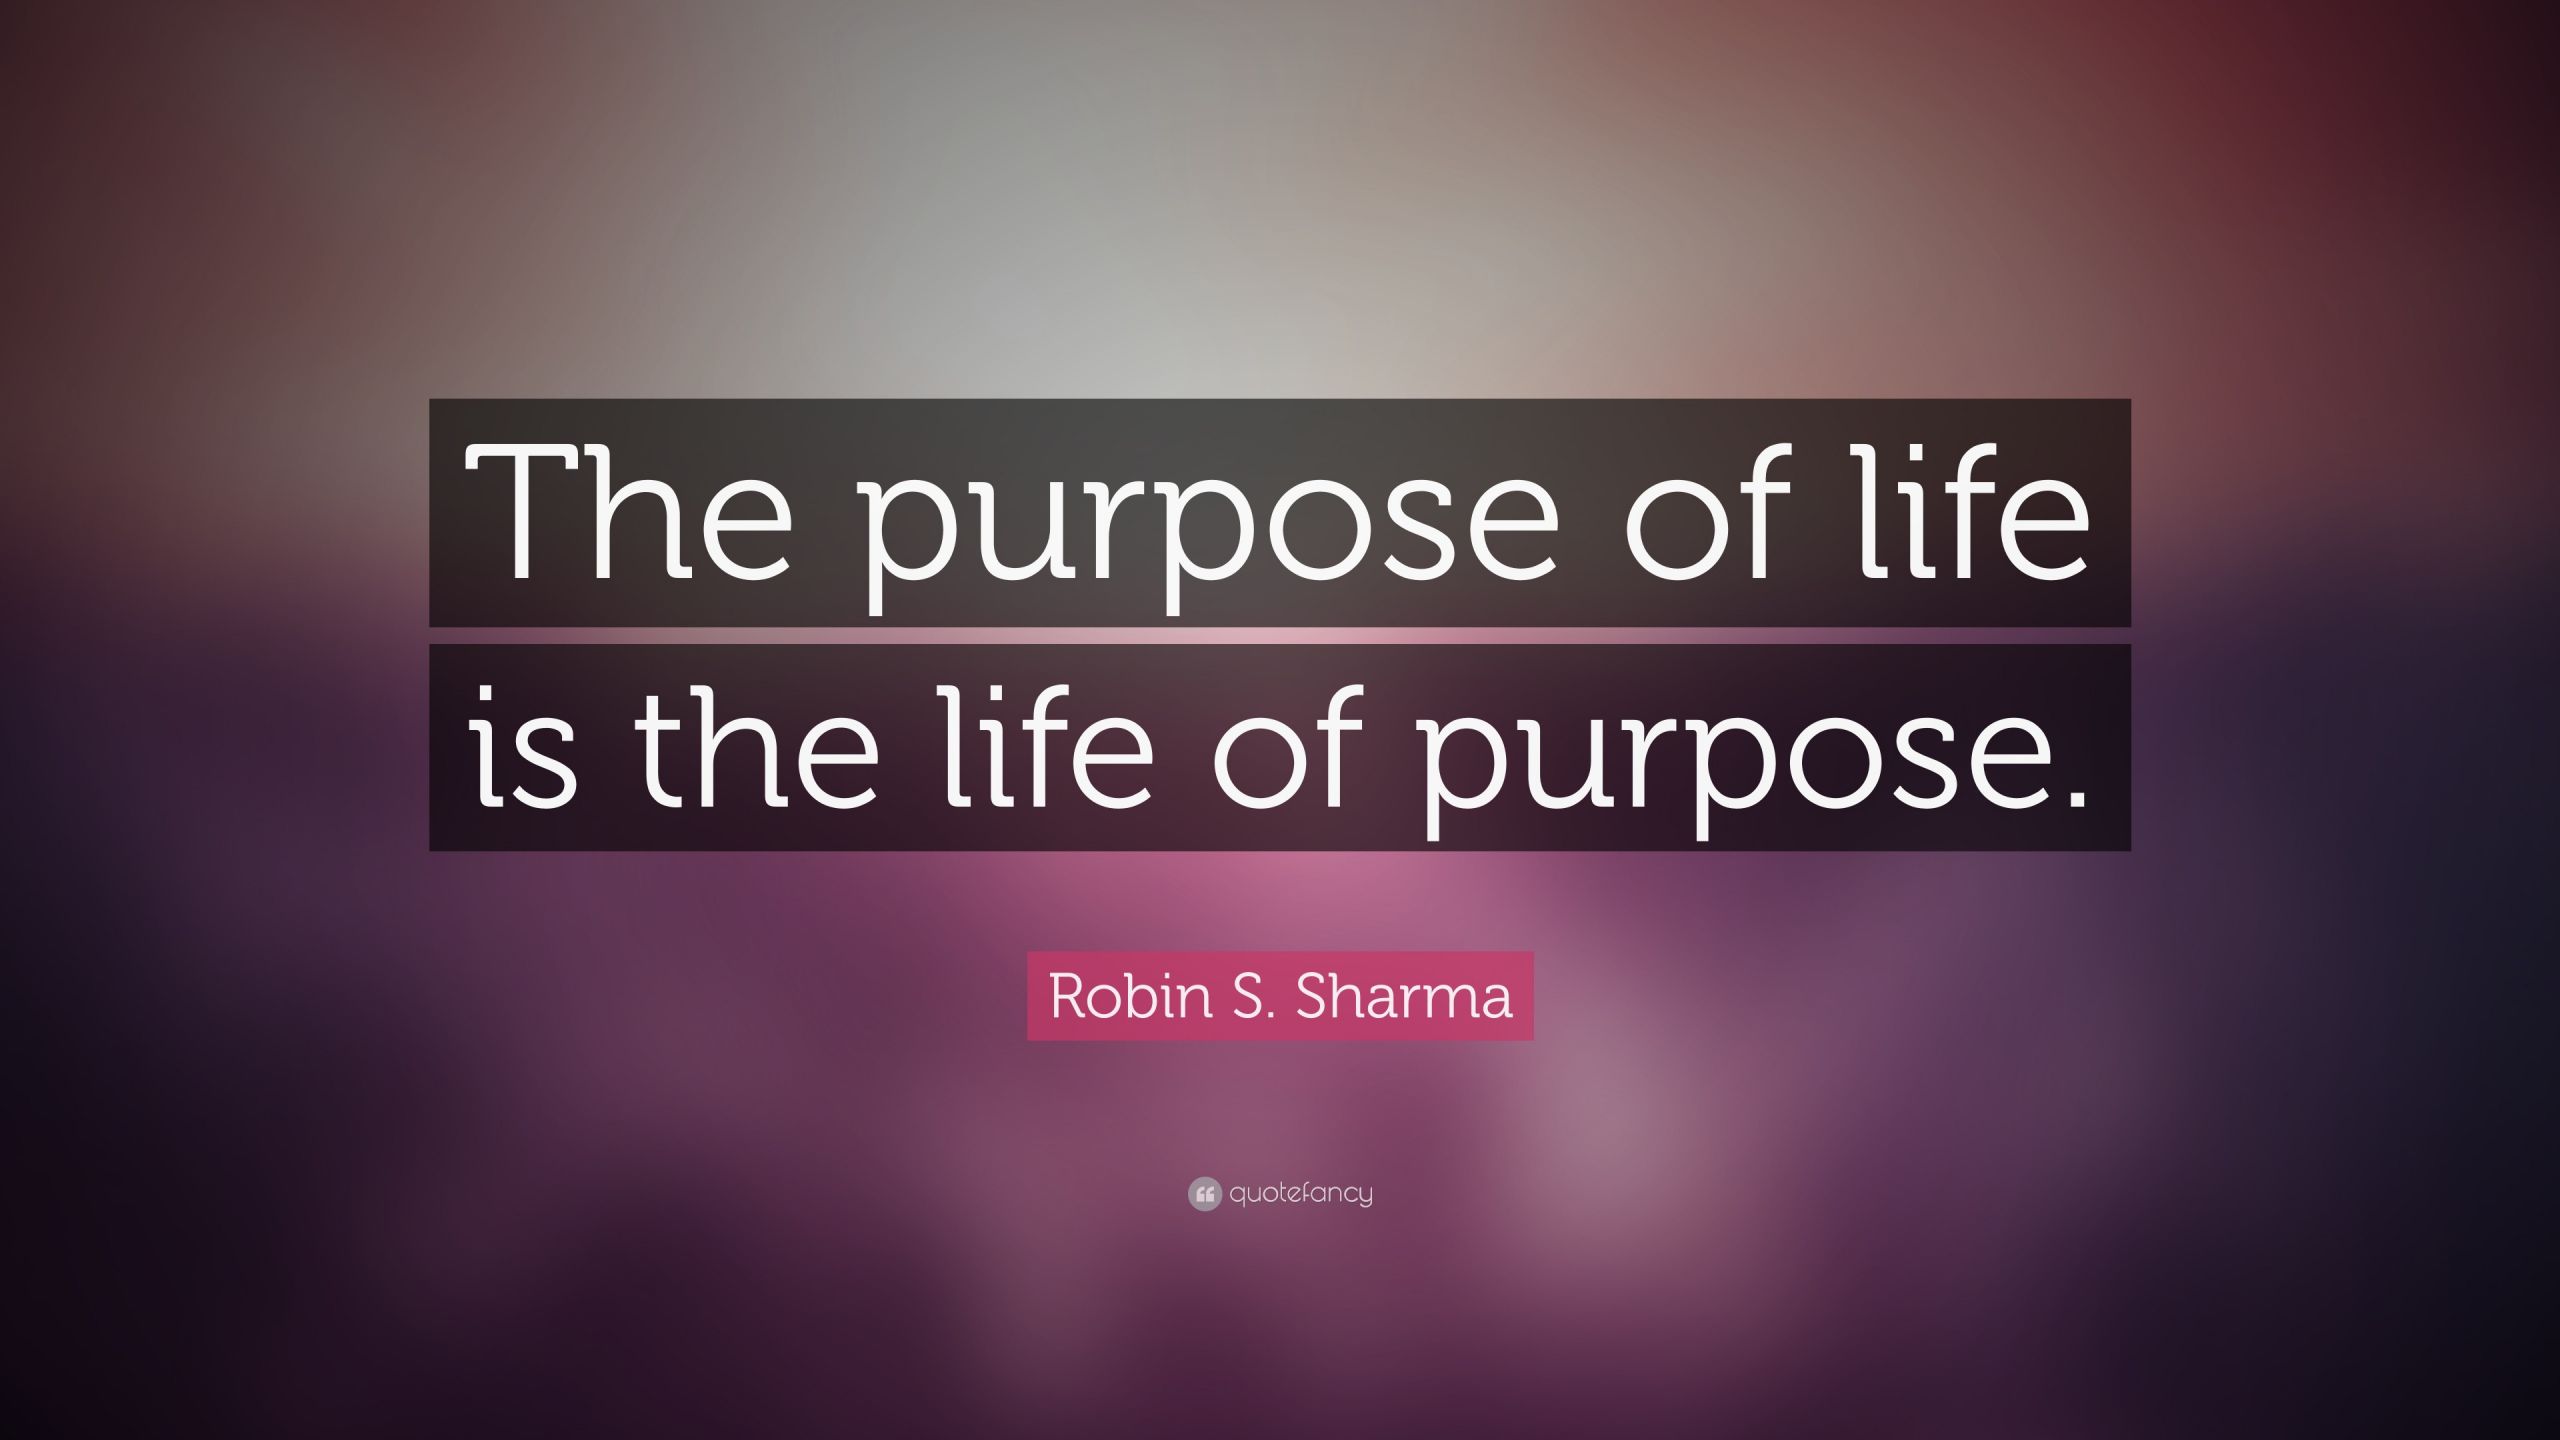 Life Purpose Quotes
 Robin S Sharma Quotes 100 wallpapers Quotefancy